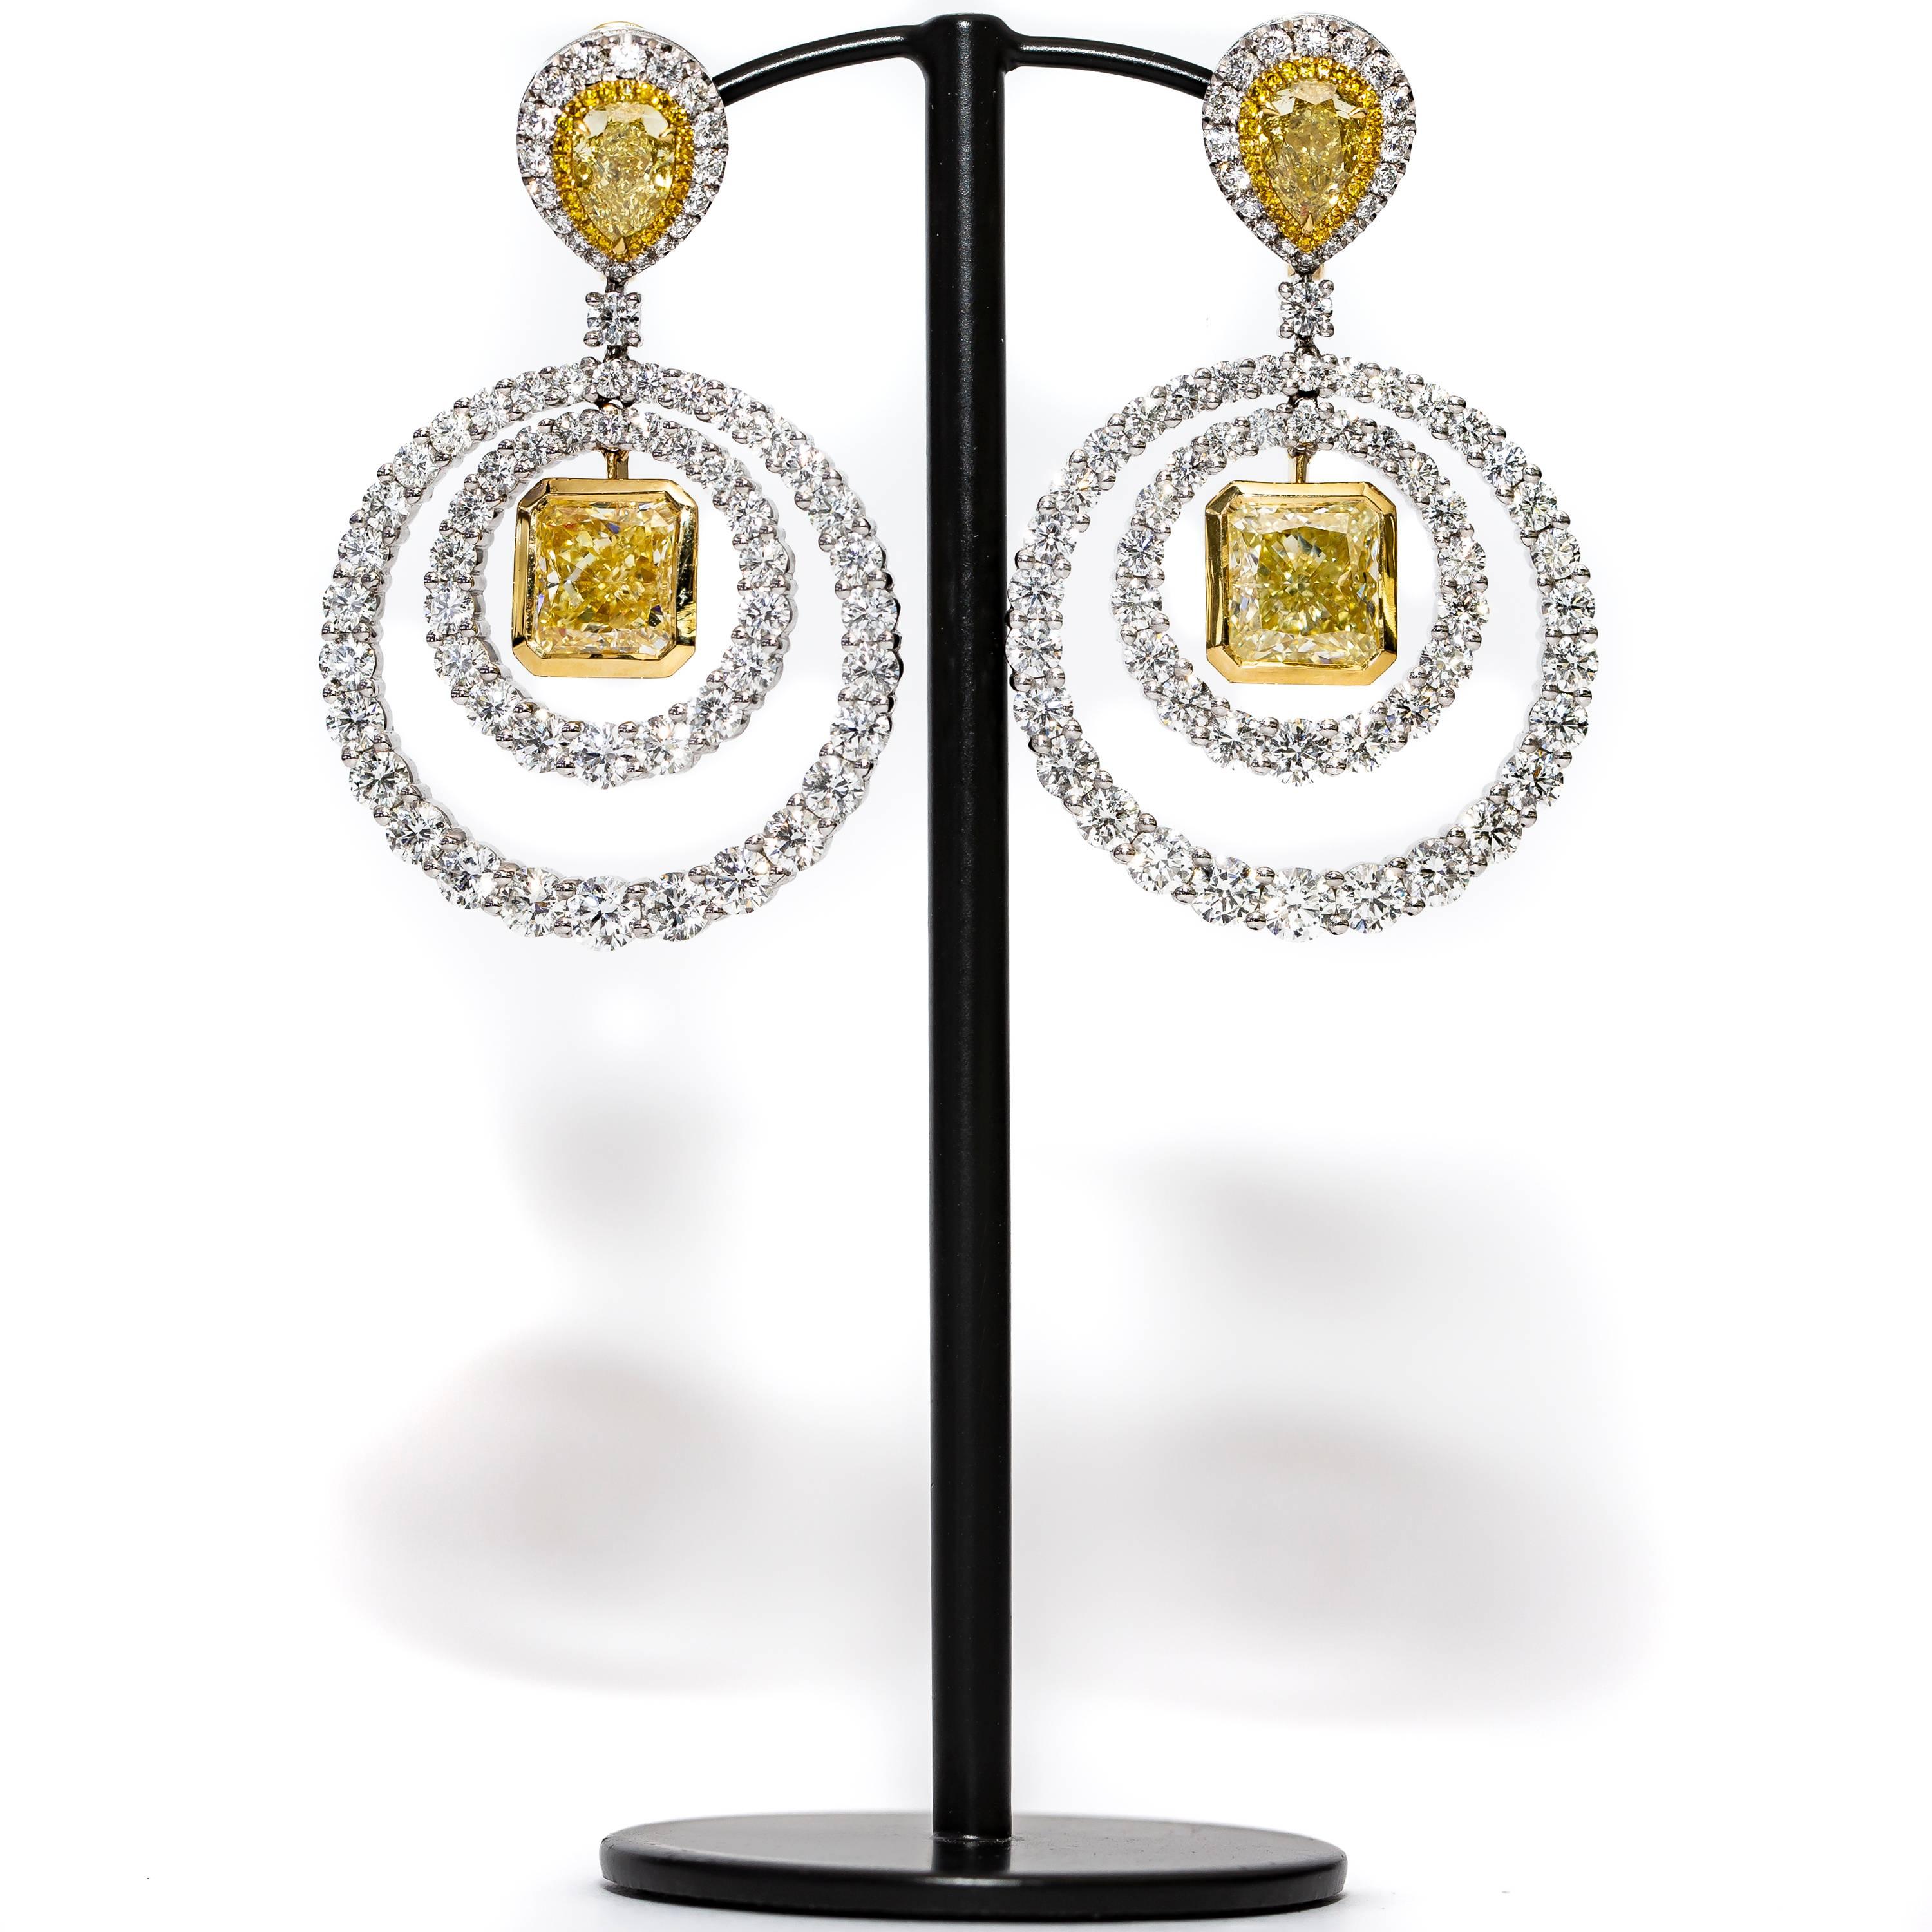 These Unique GIA Certified 19.38 Carat drop circle of life Earrings featuring 2 Square Cut - Cornered Rectangular Modified Brilliant GIA Certified Diamonds Y to Z in color with VS1 to VVS2 clarity totaling 8.02 Carat which are situated in the center